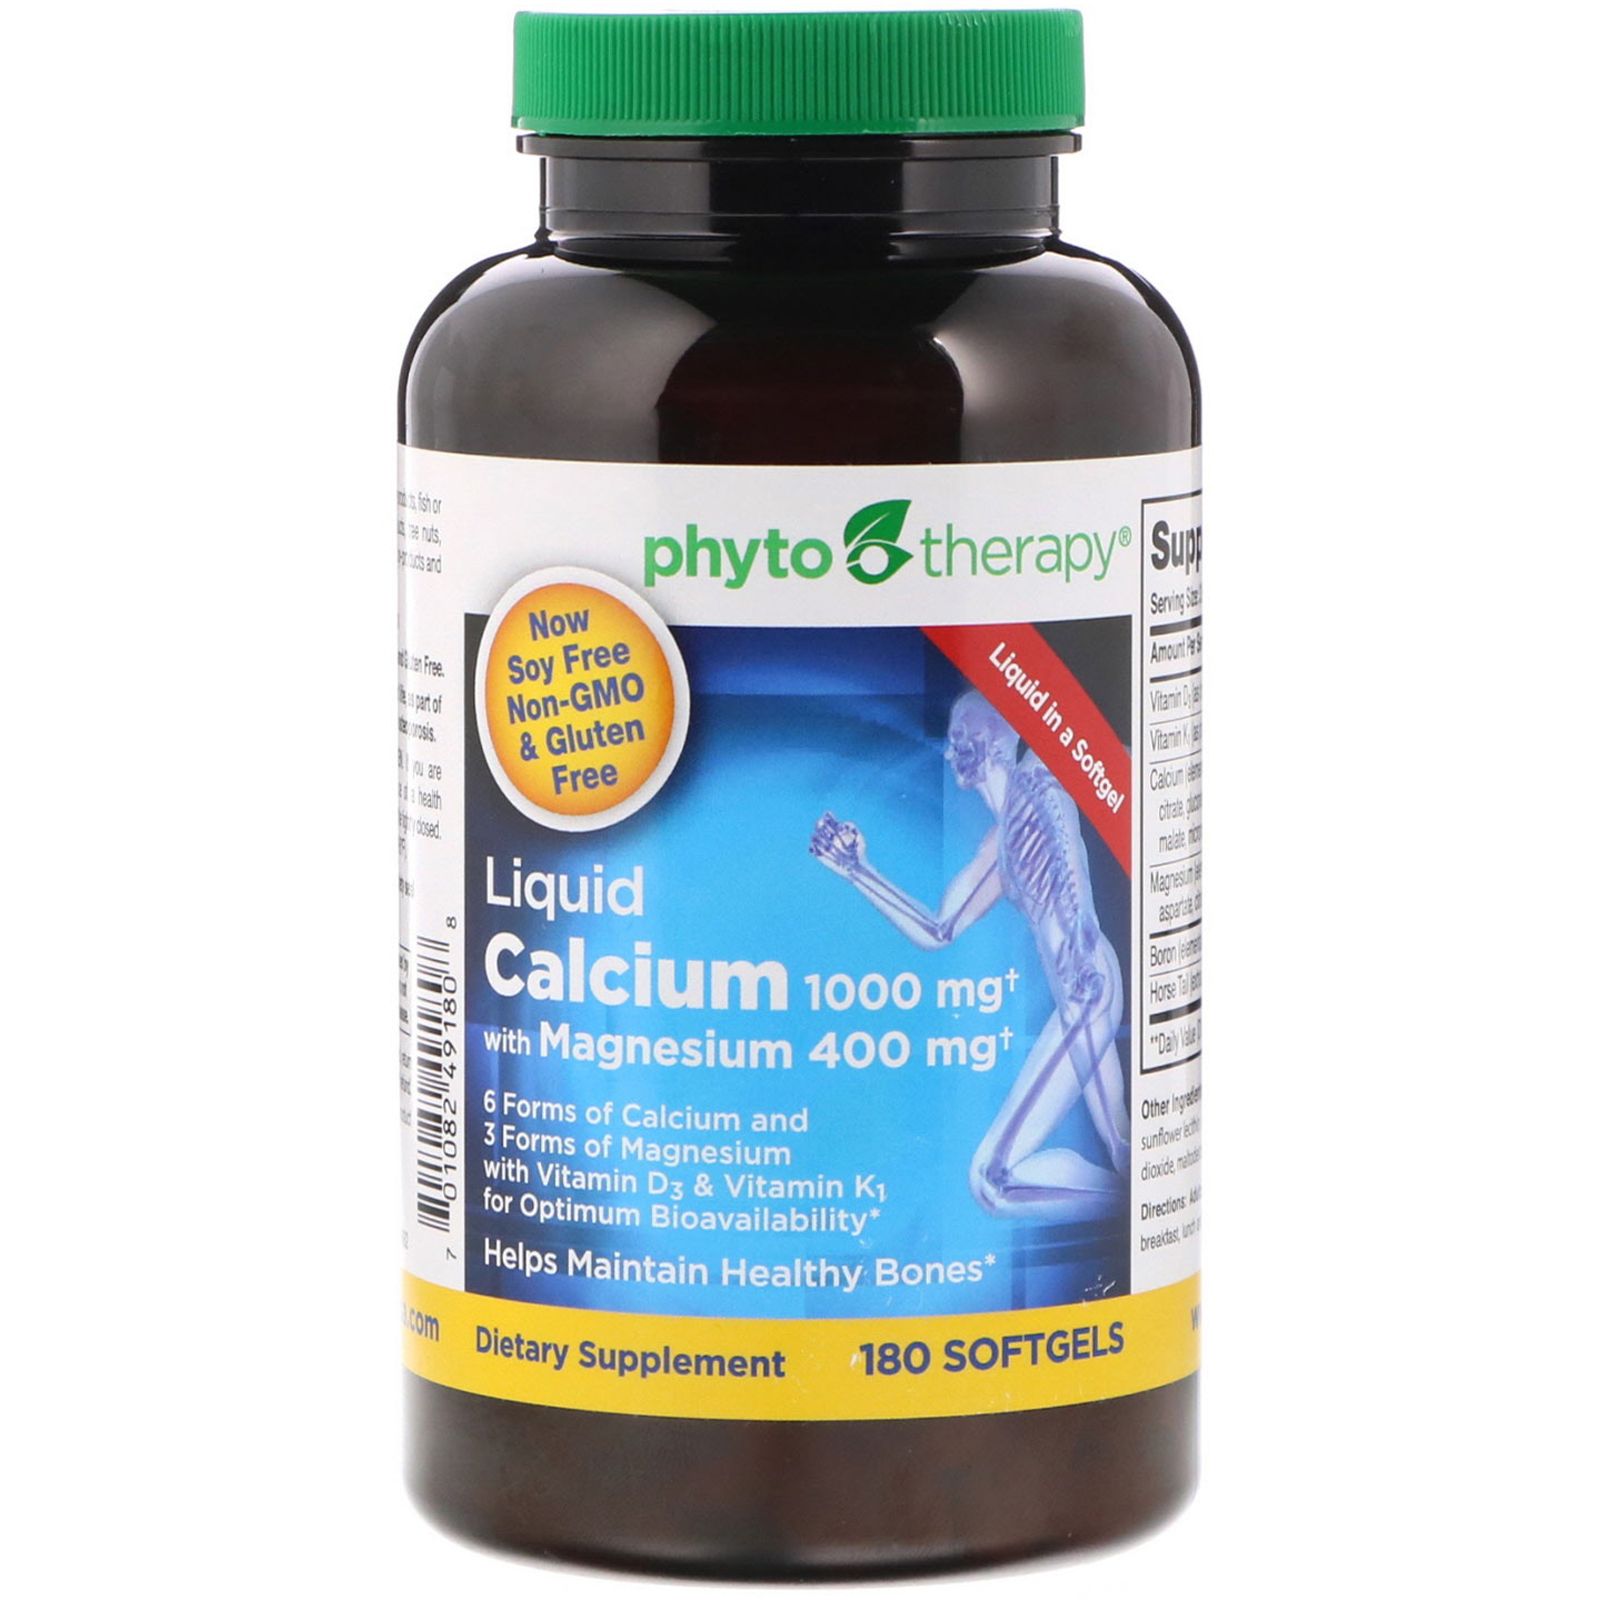 Phyto Therapy Inc. Liquid Calcium with Magnesium 1000 mg /400 mg 180 Softgels